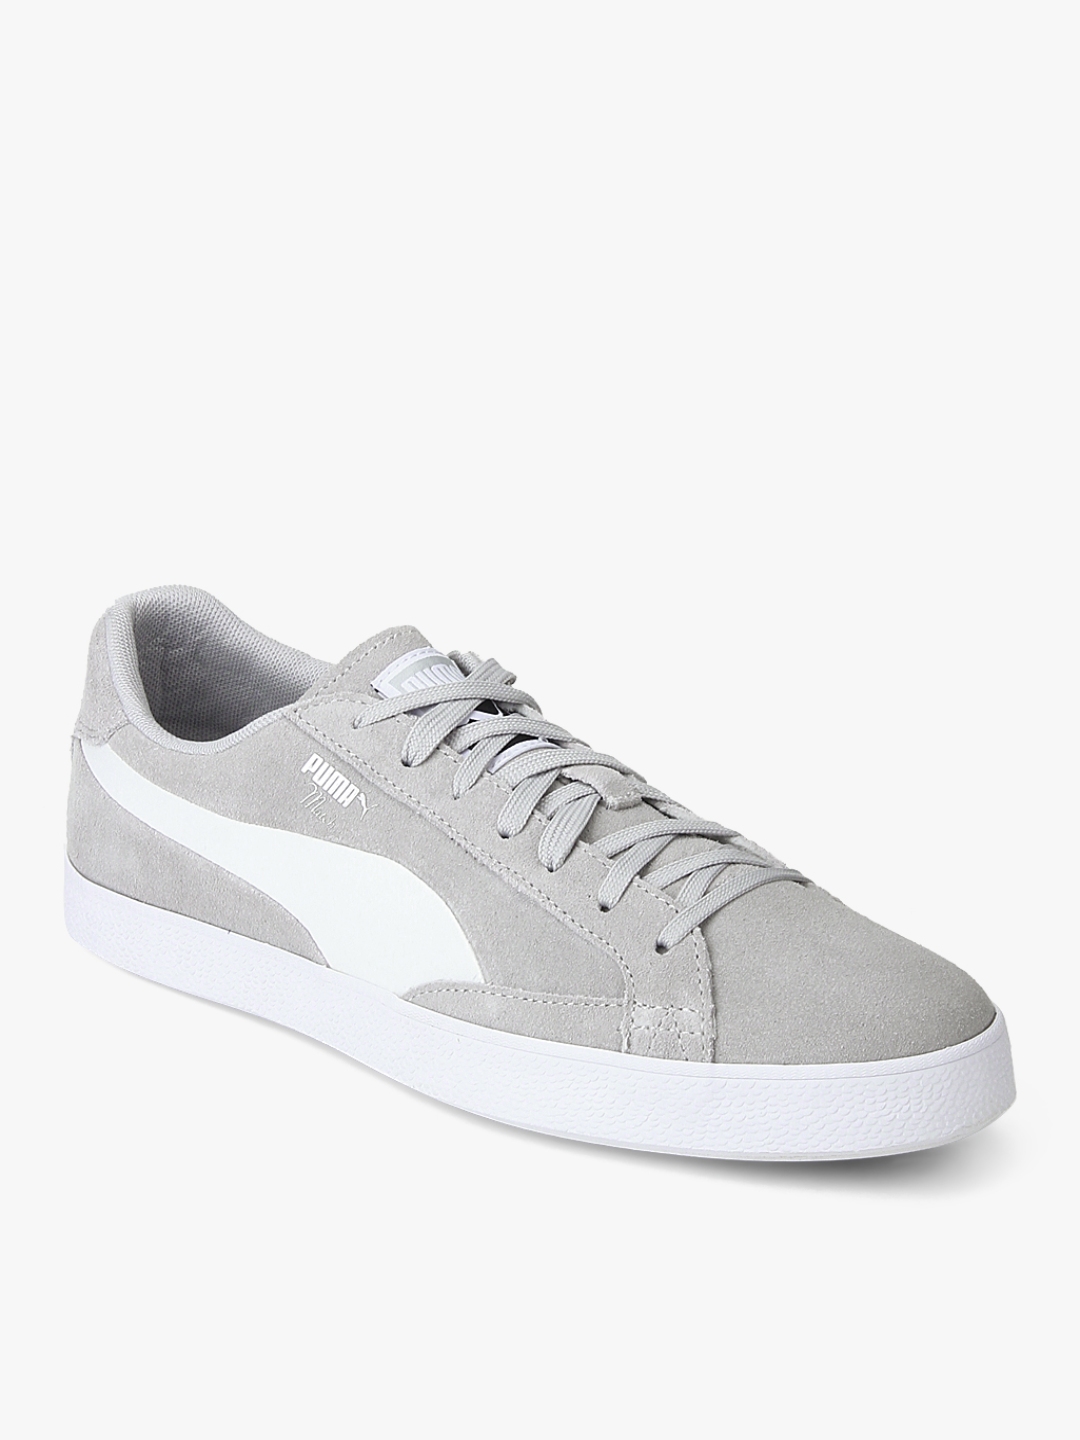 Refrein Gluren Westers Buy Match Vulc 2 Grey Sneakers - Casual Shoes for Men 7634379 | Myntra